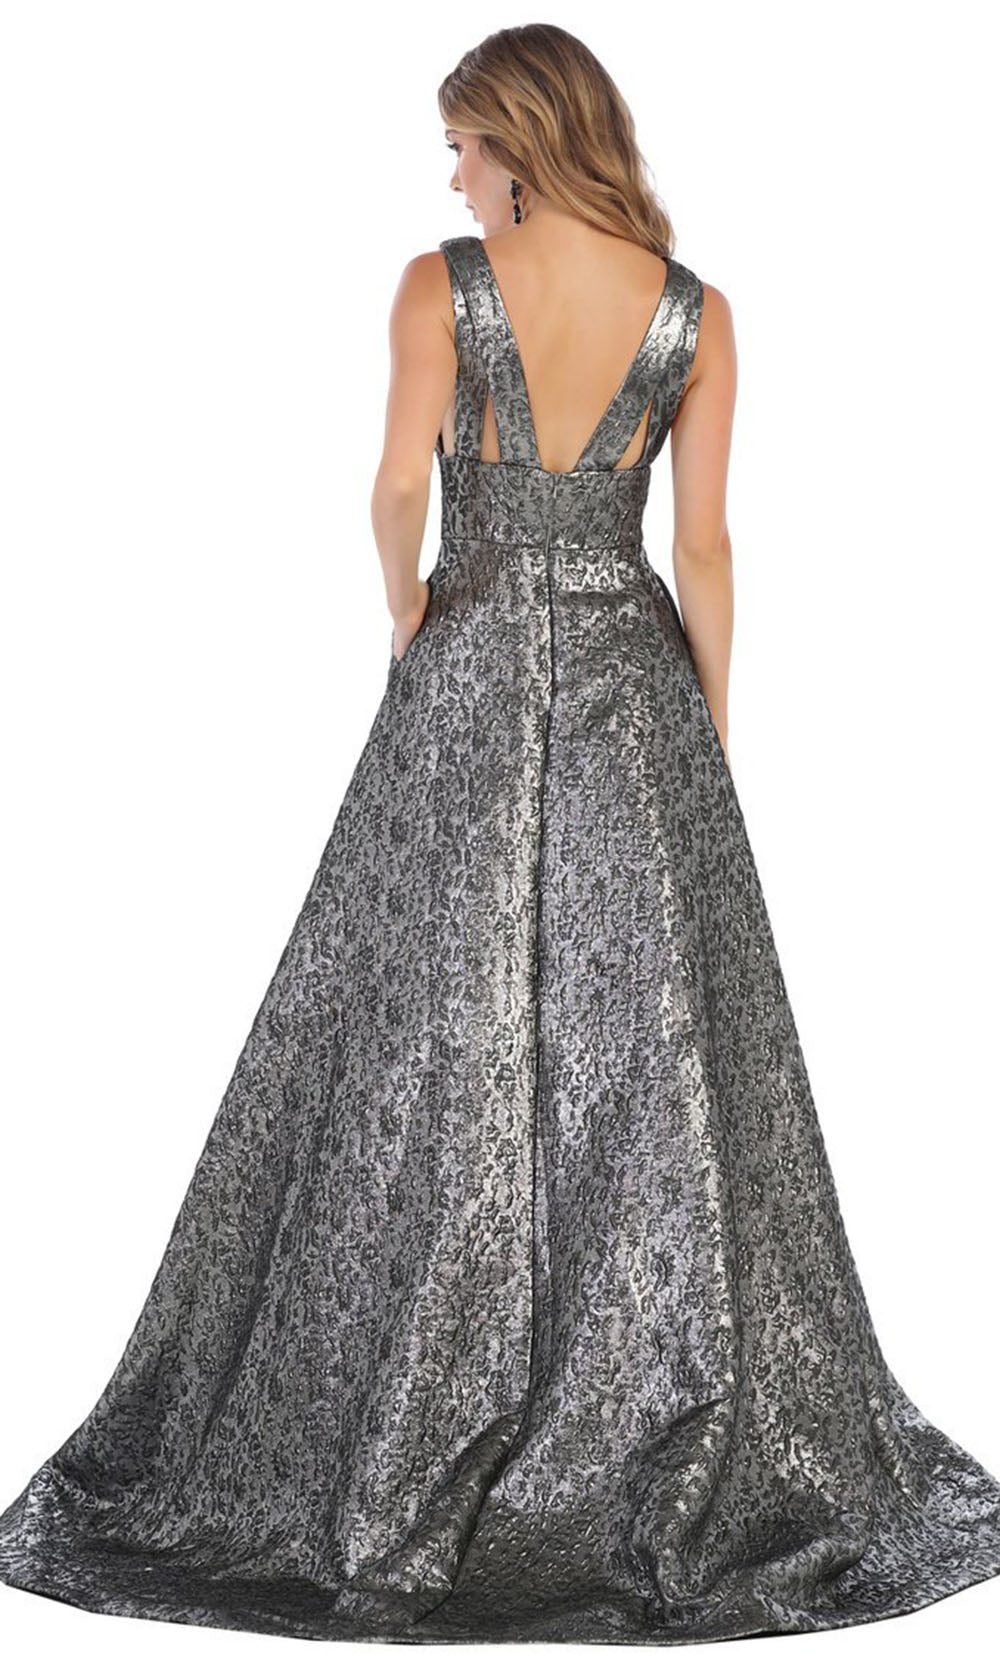 May Queen - RQ7701 Embossed Print Long Gown In Silver